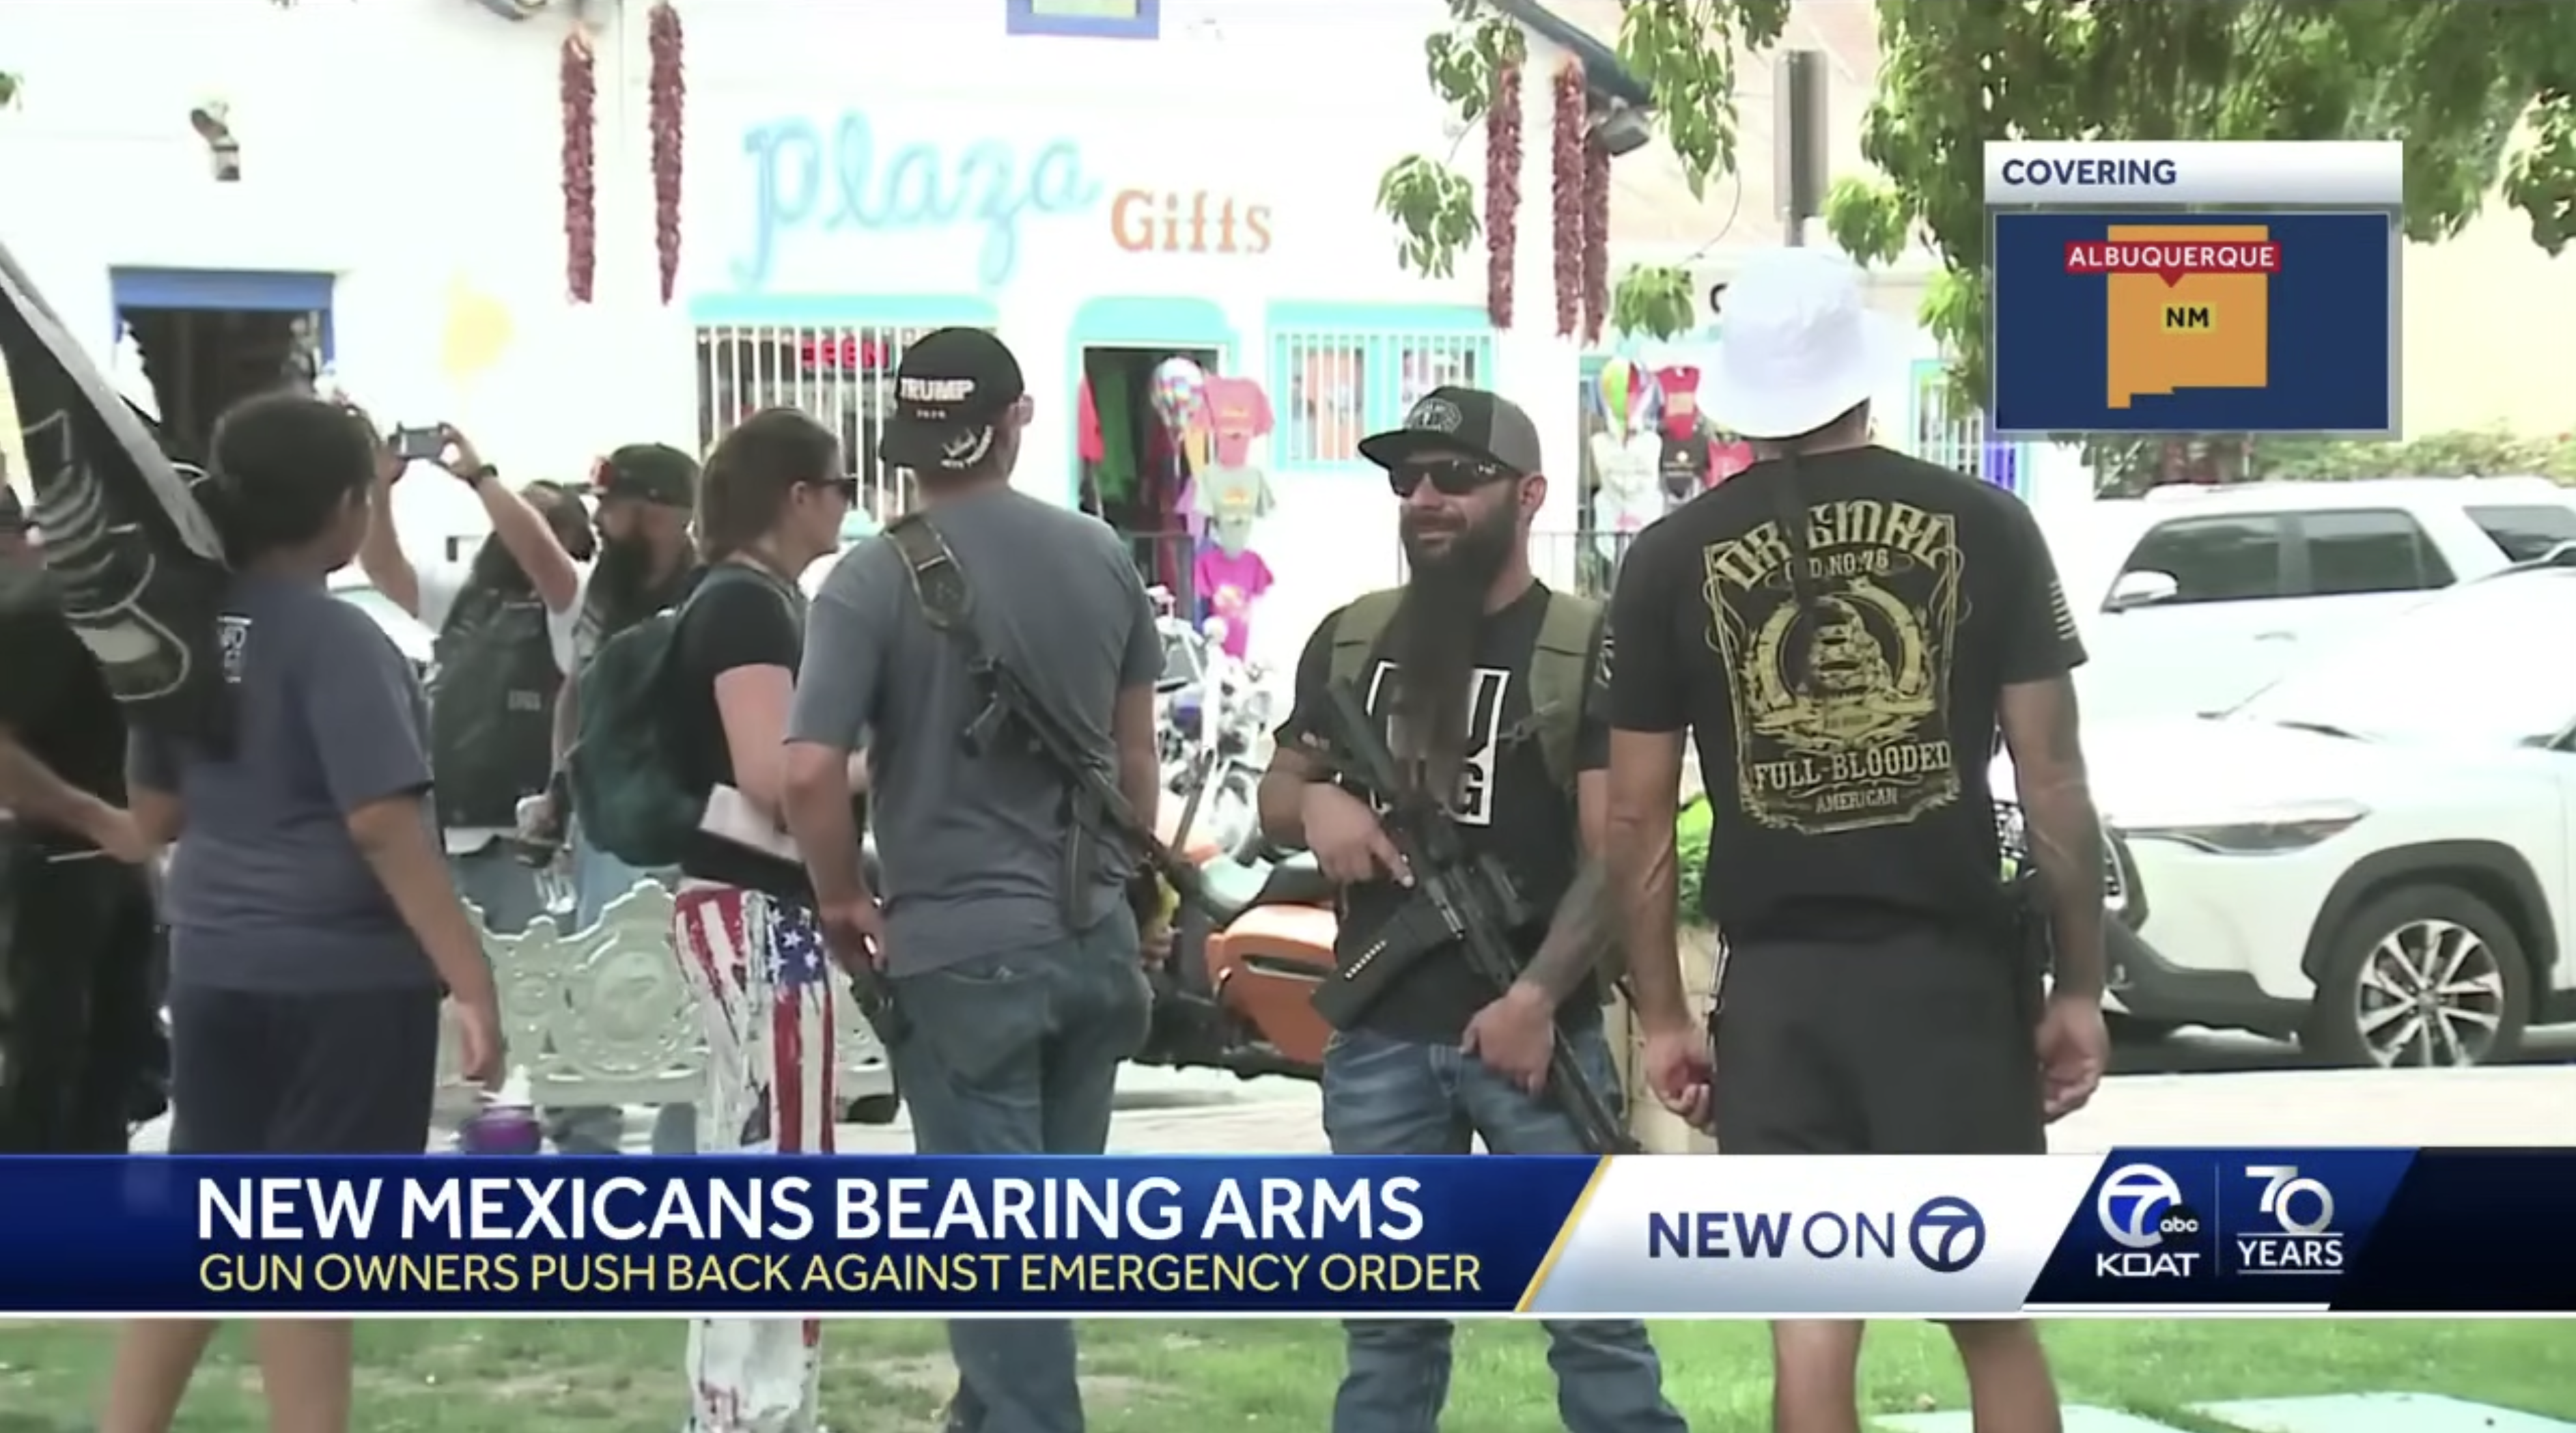 Gun owners in New Mexico openly carry firearms, defying the ‘tyrannical’ Democrat governor.